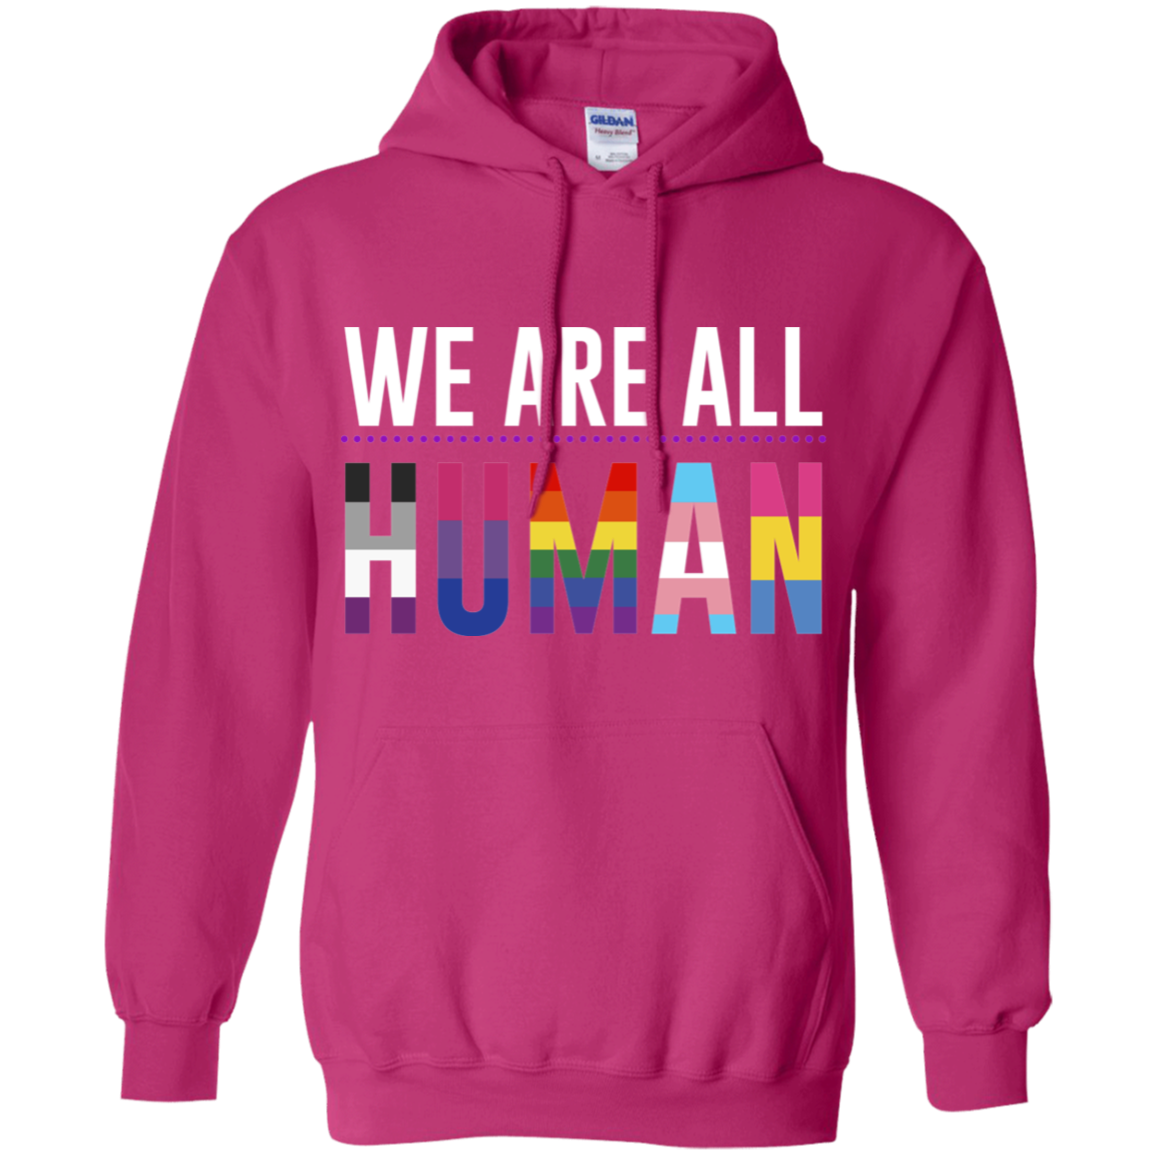 We Are All Human LGBT pride pink hoodie for women & men